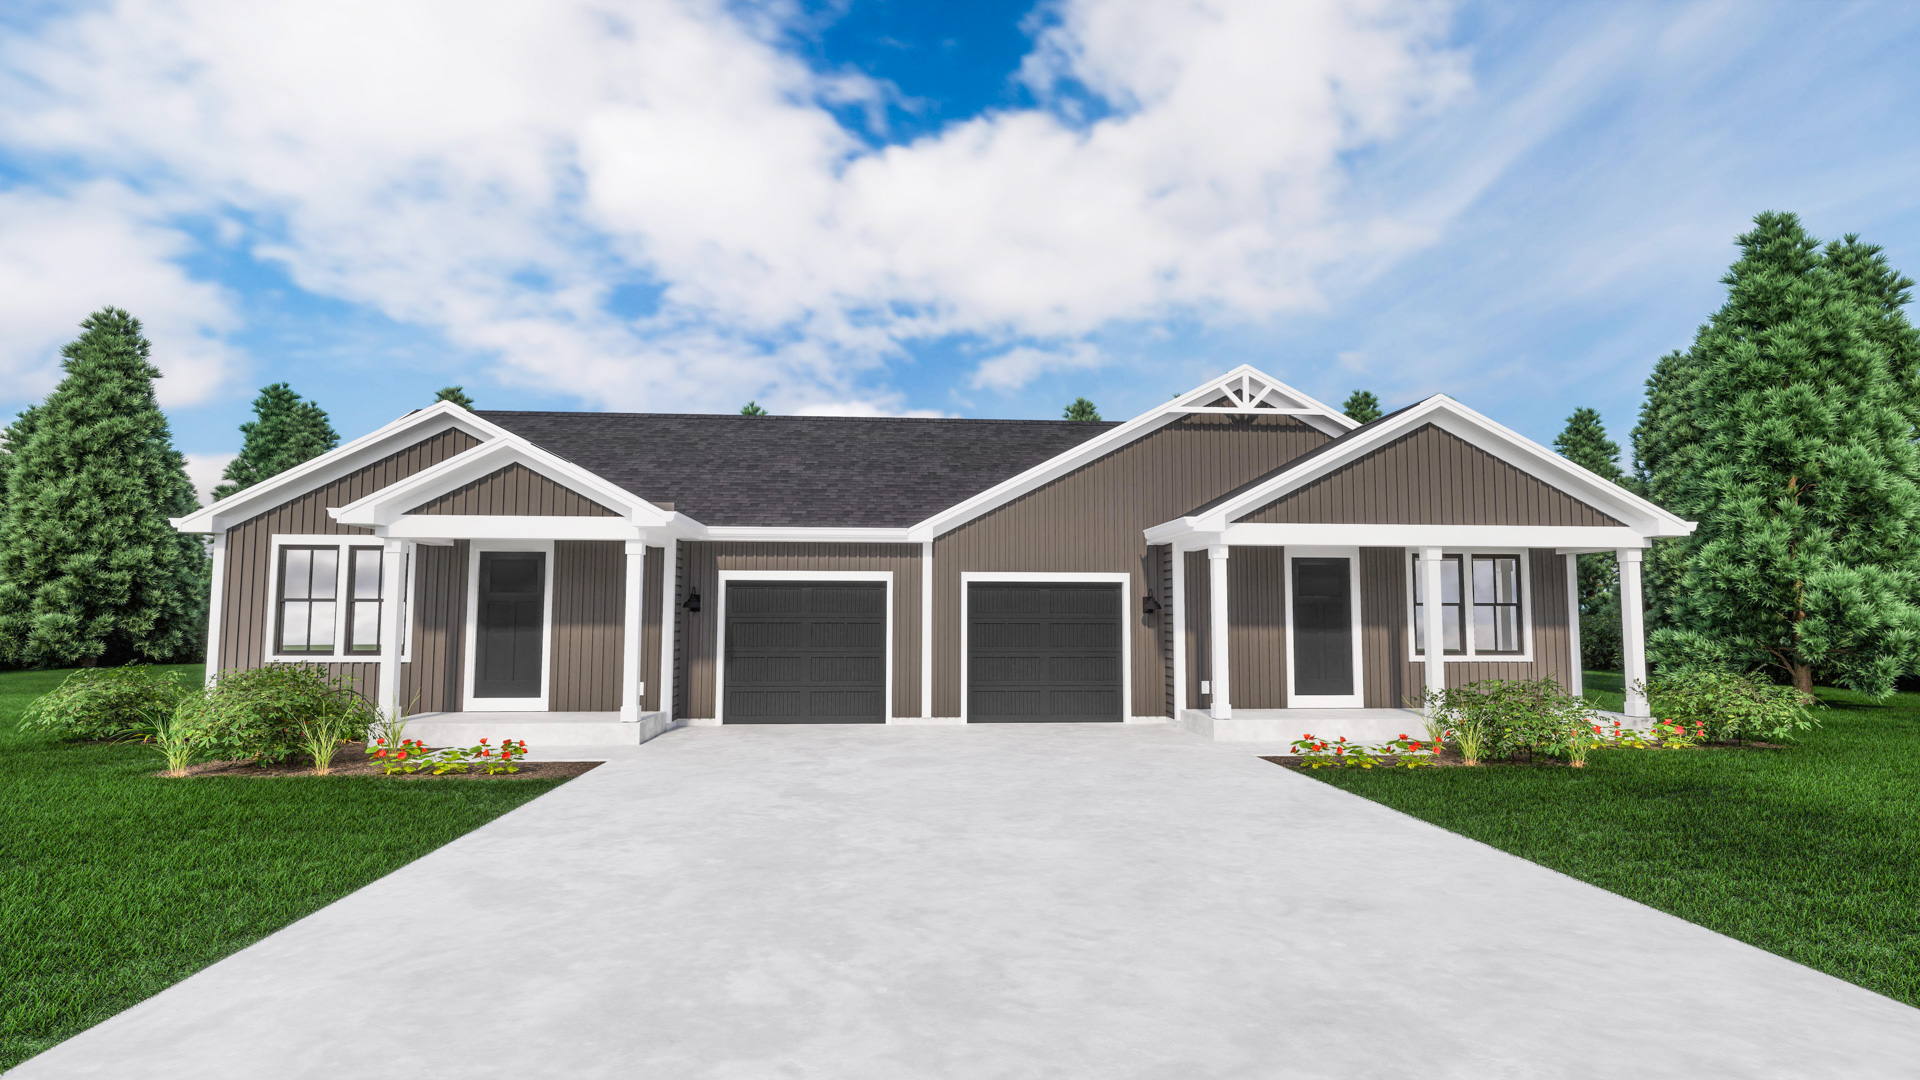 The Pine and Cypress Duplex Condo Rendering by Stepping Stone Homes